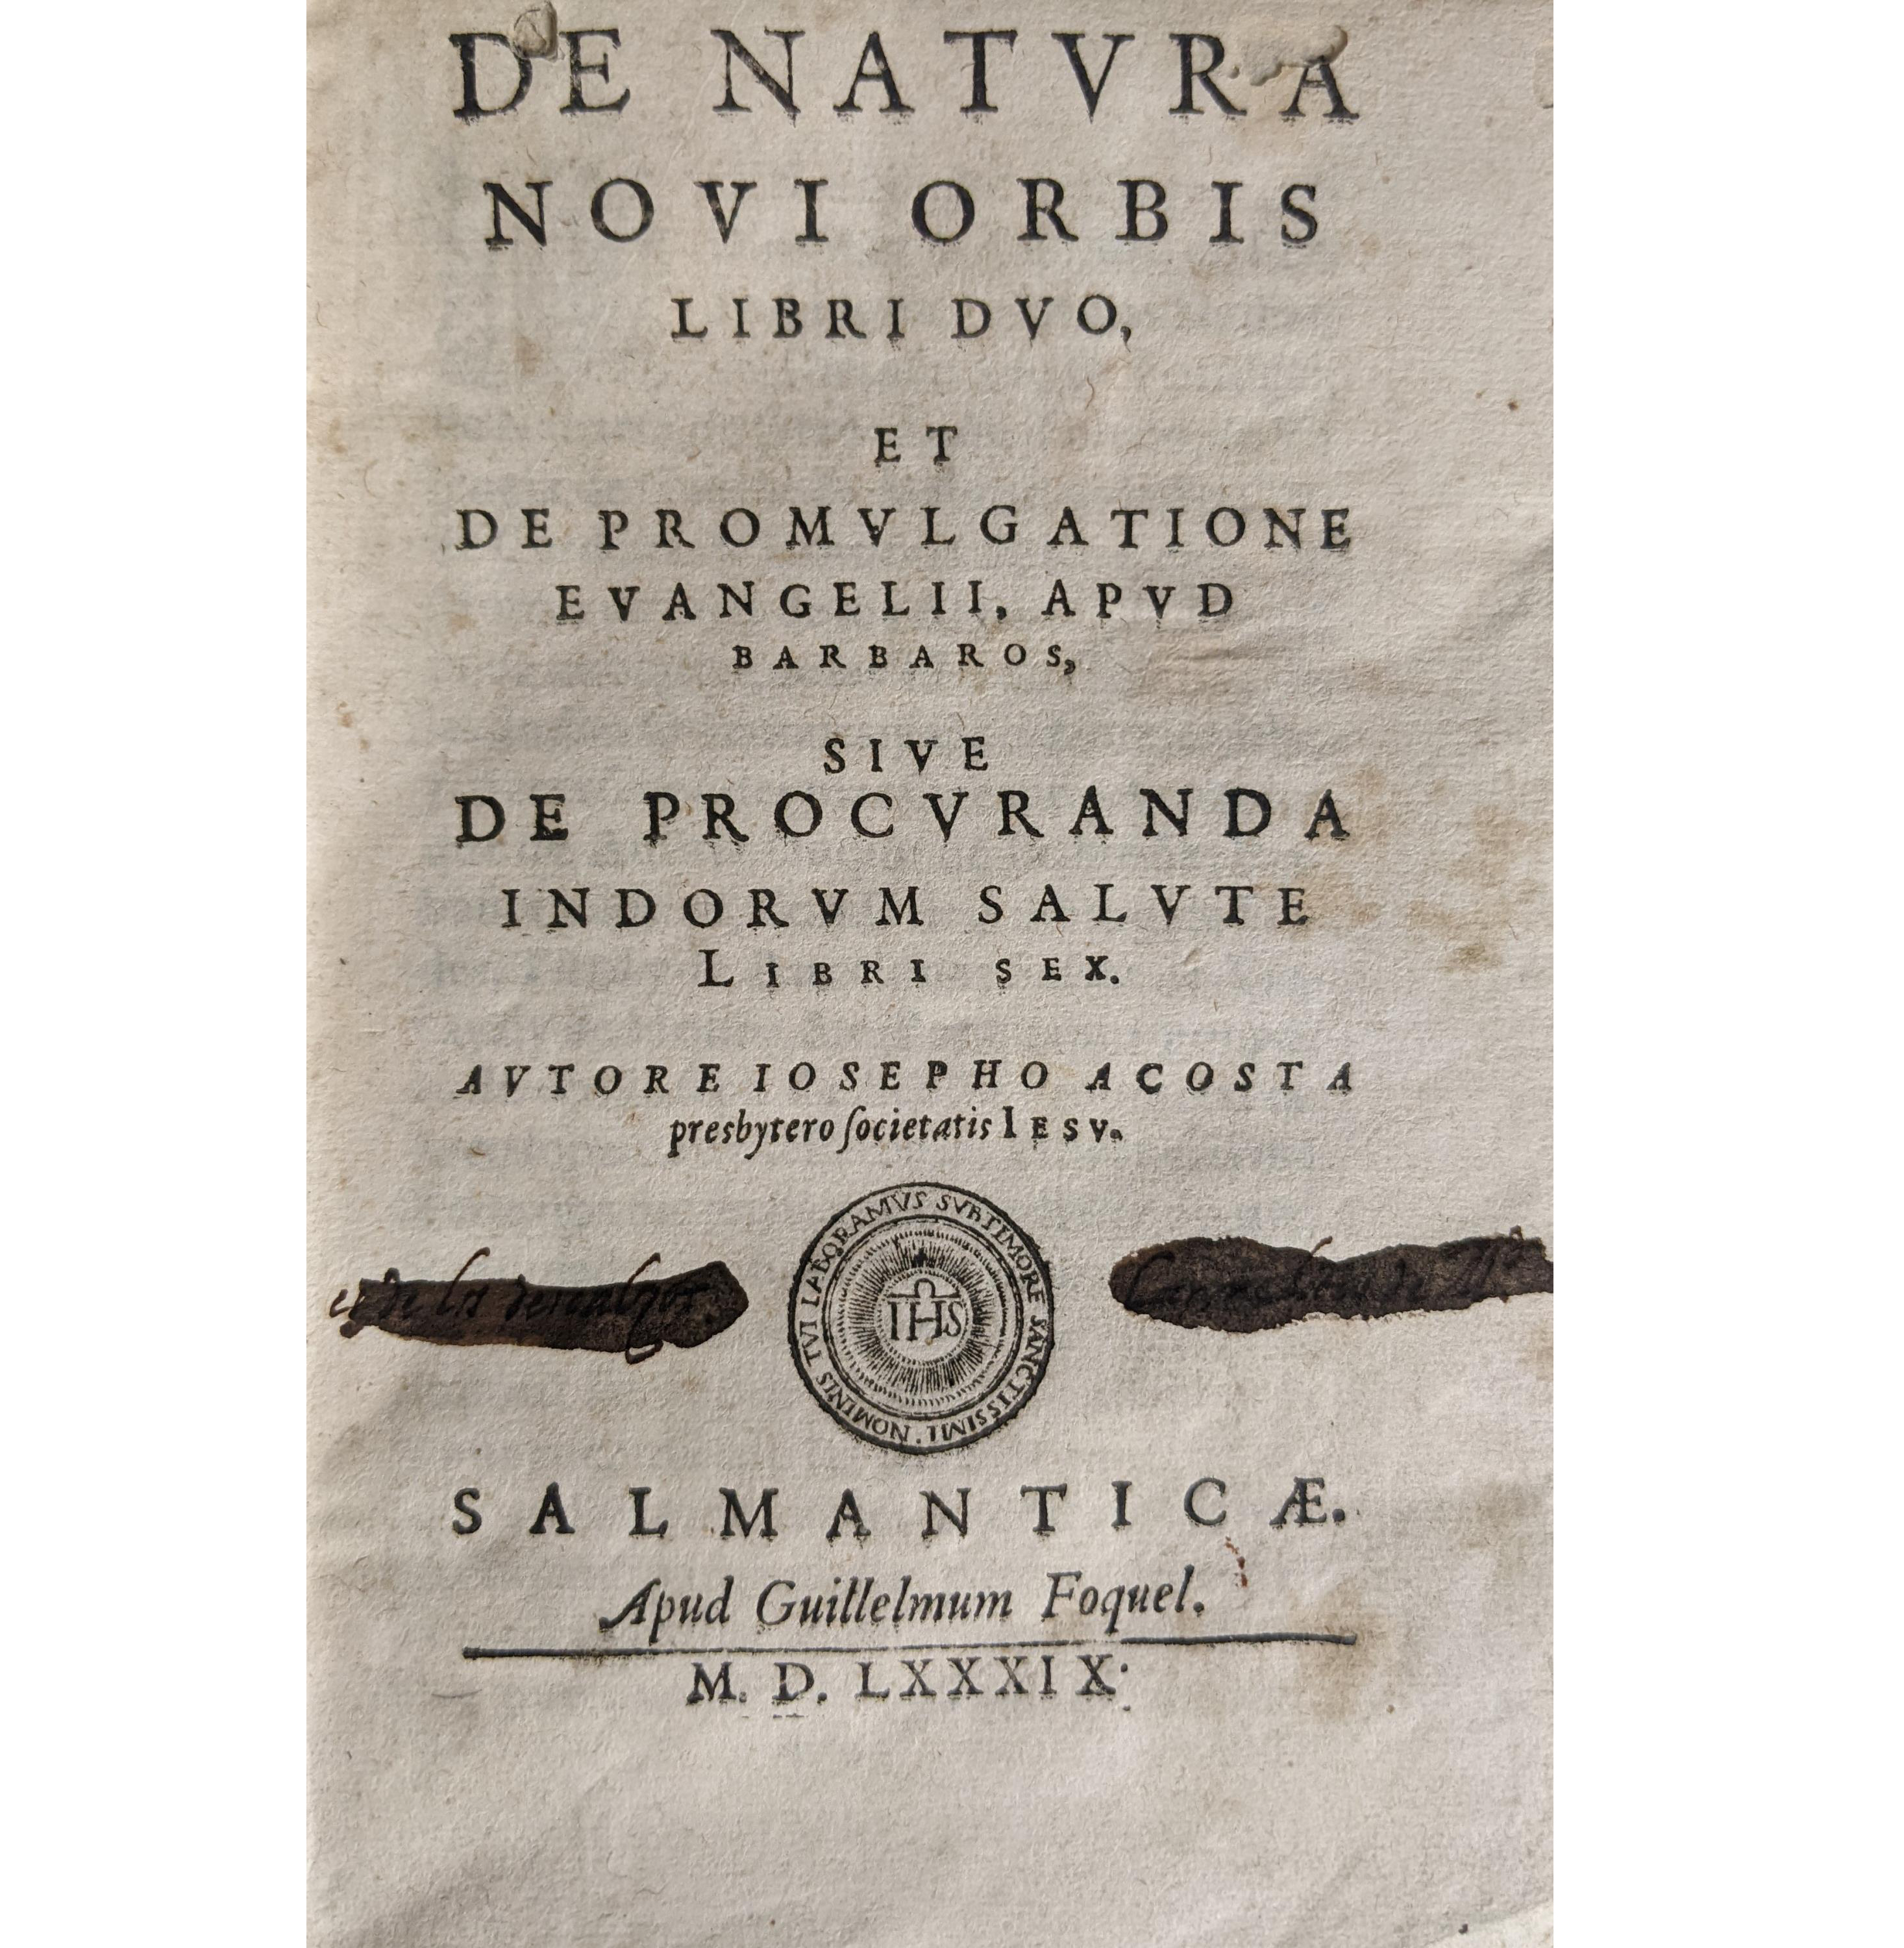 This first edition copy of ‘De natura Novi Orbis libri duo’ by Jose de Acosta, dated 1589 on the title page but 1588 on the second title page and colophon, should bring $2,000-$3,000. Image courtesy of Quinn’s Auction Galleries